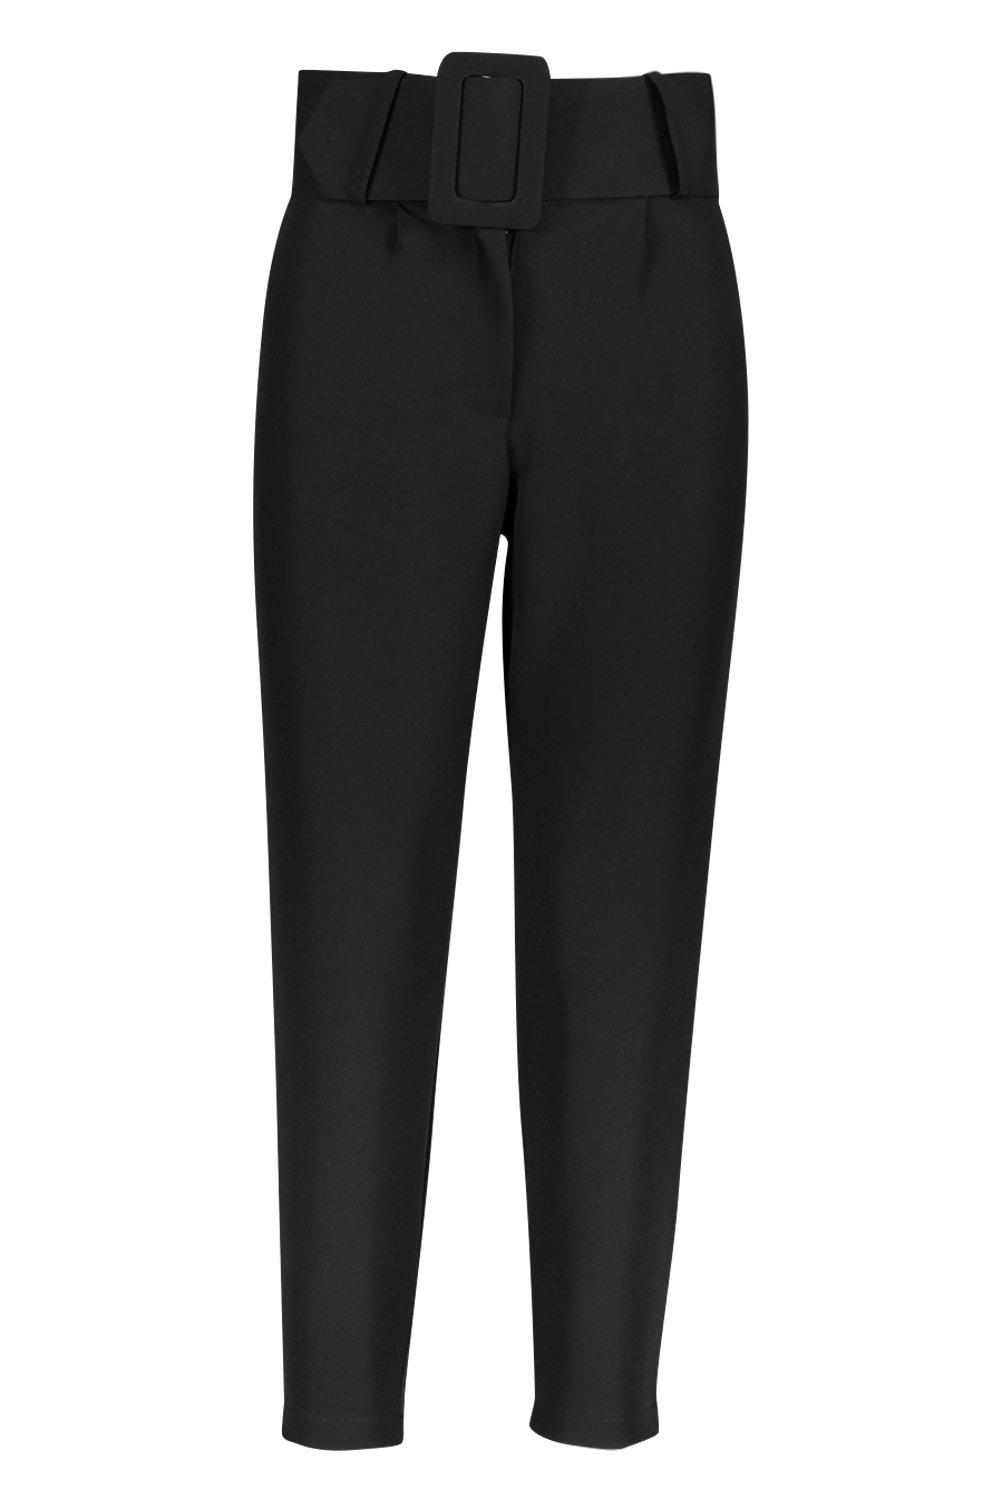 Boohoo Super High Waisted Belted Peg Pants Womens Clothing Trousers Slacks and Chinos Skinny trousers 